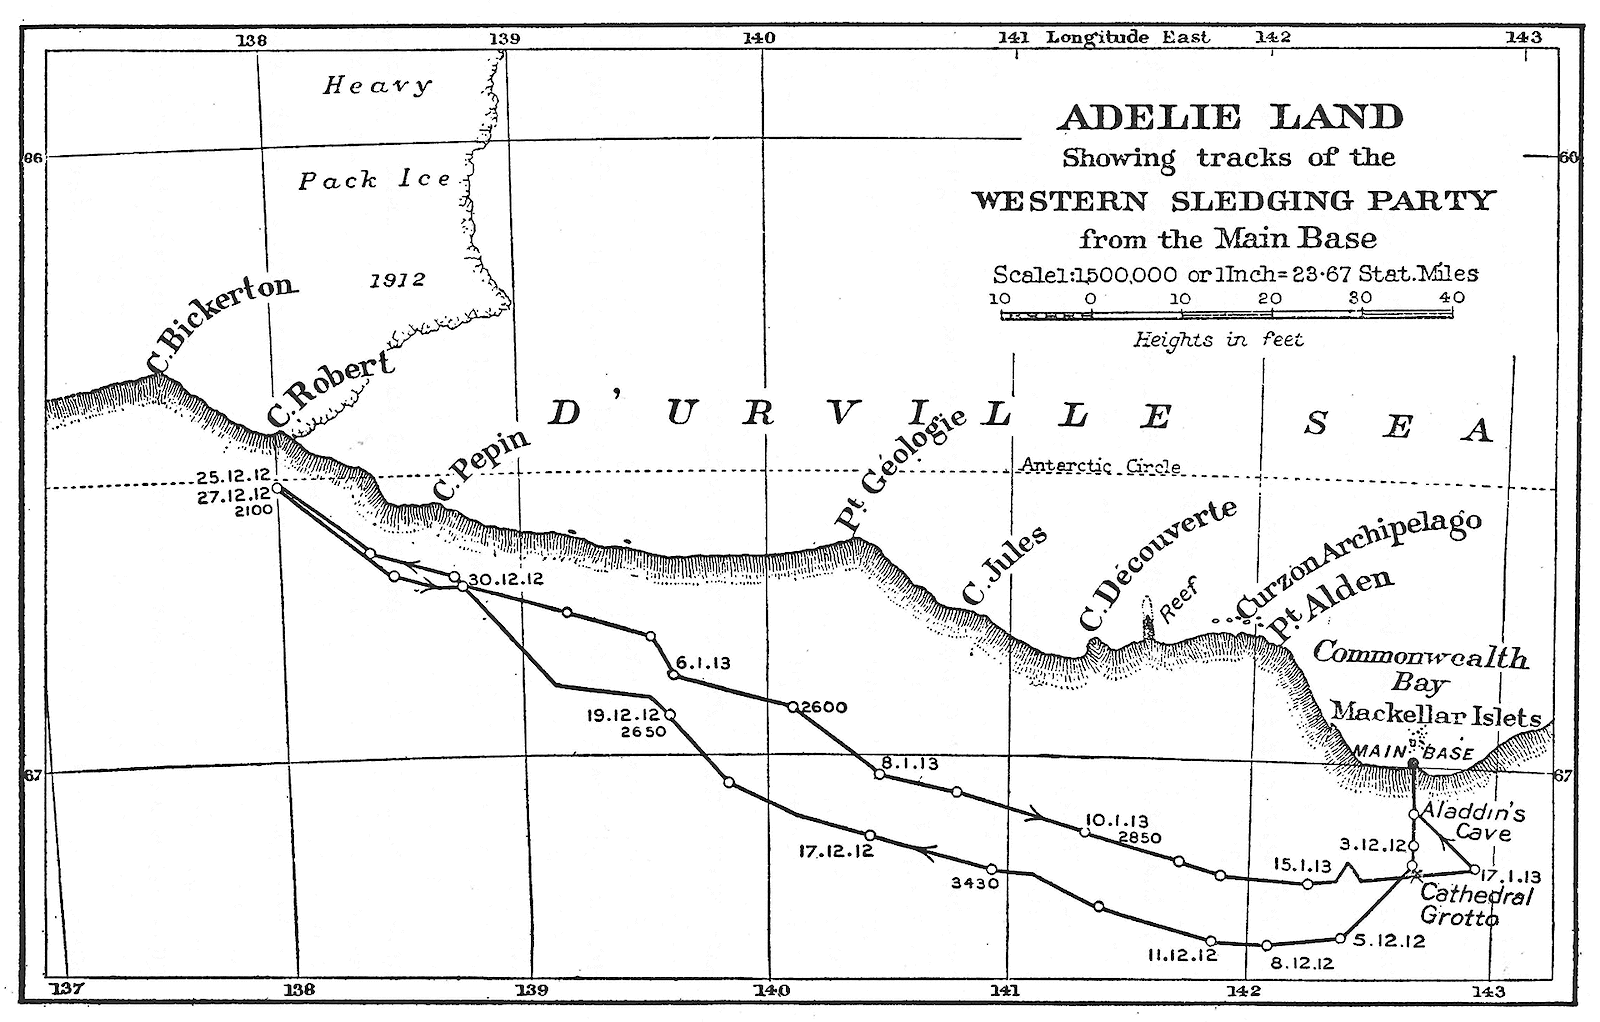 Map detailing the tracks of the Western Sledging Party from the Main Base.